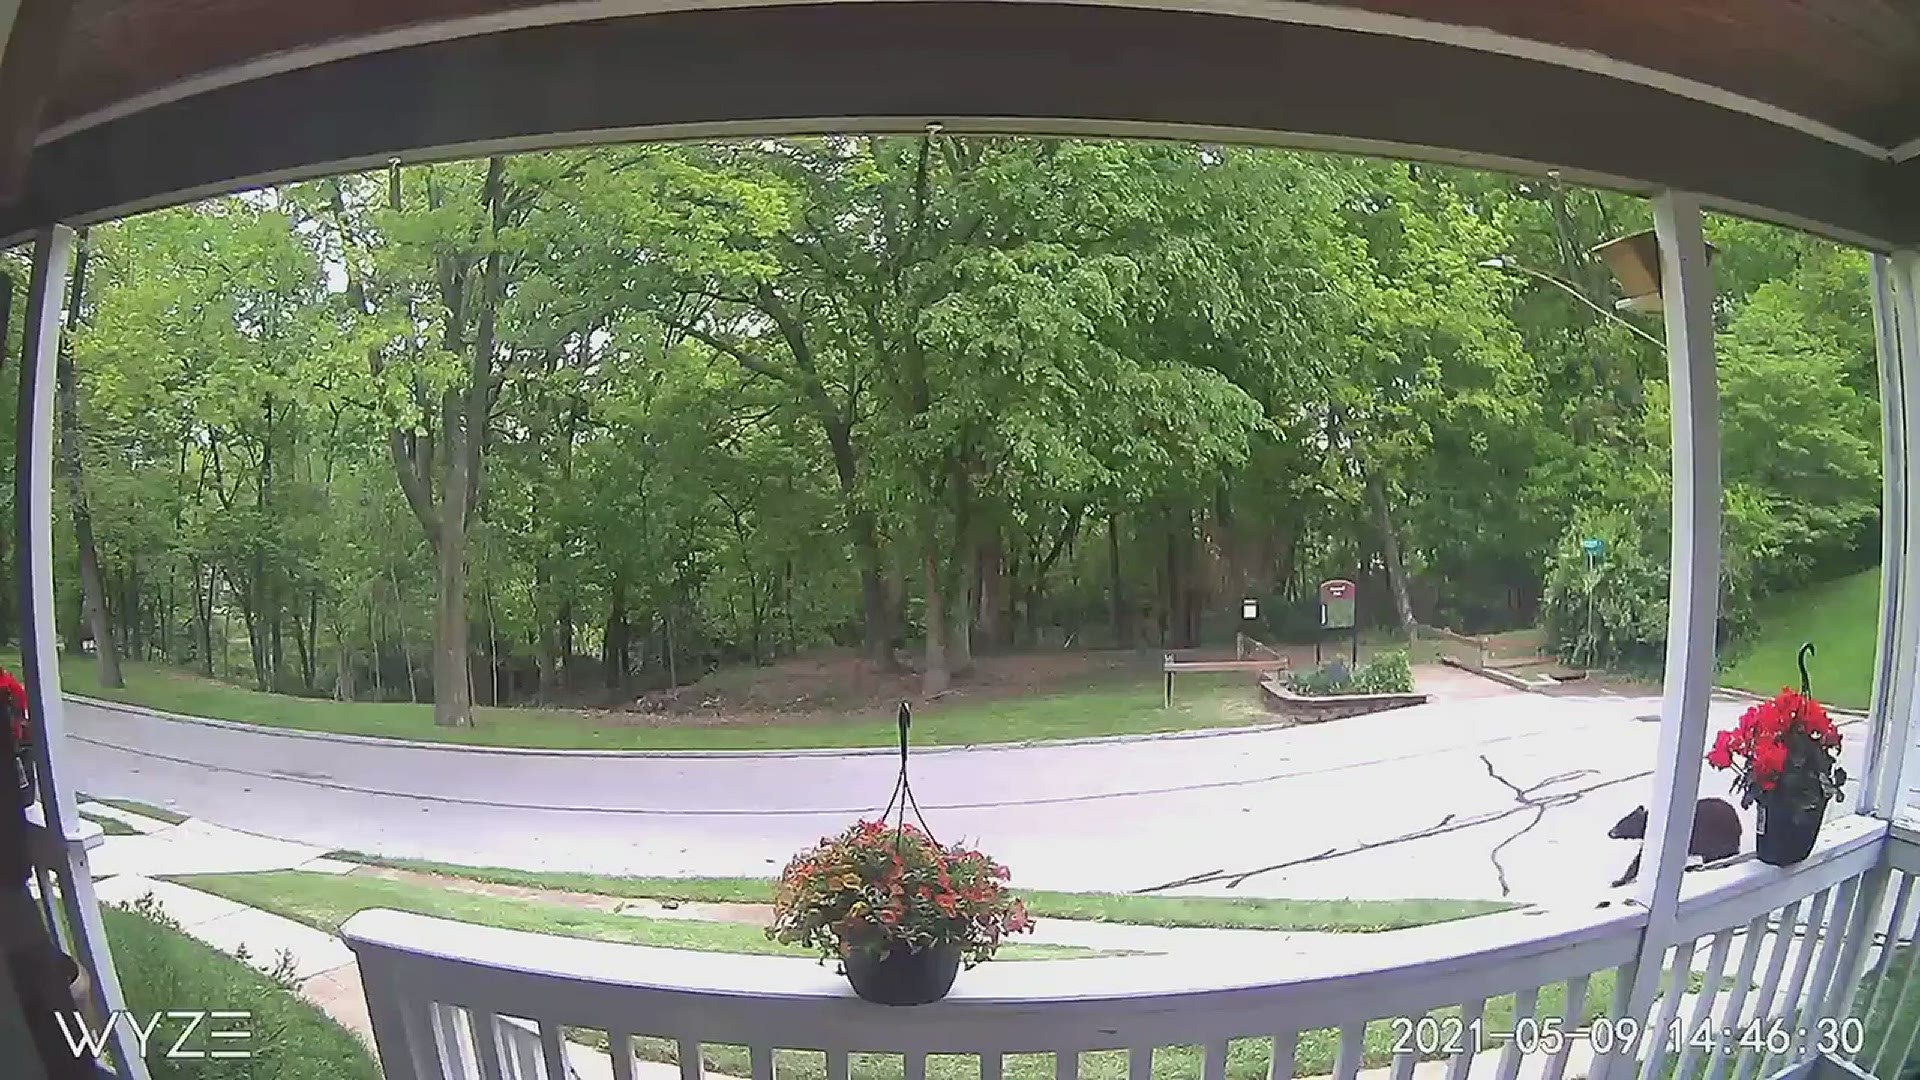 Jeff Fogarty provided this video of a bear in Brentwoos
Credit: Jeff Fogarty